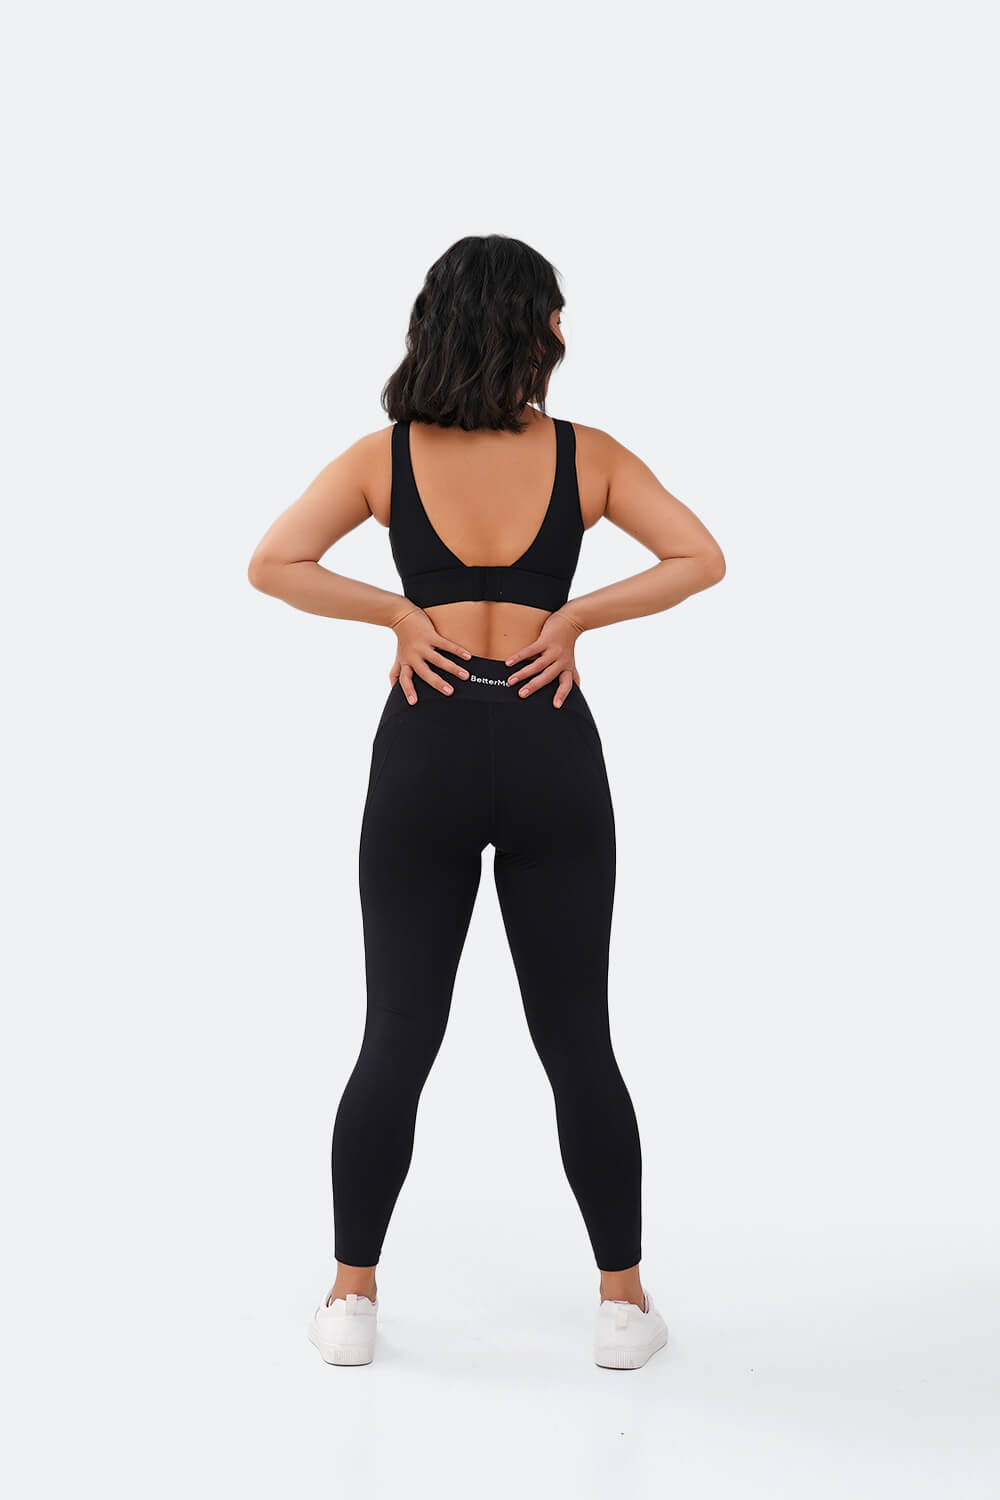 BetterMe 7/8 High-Waisted Leggings in Black | Slimming and Bum ...